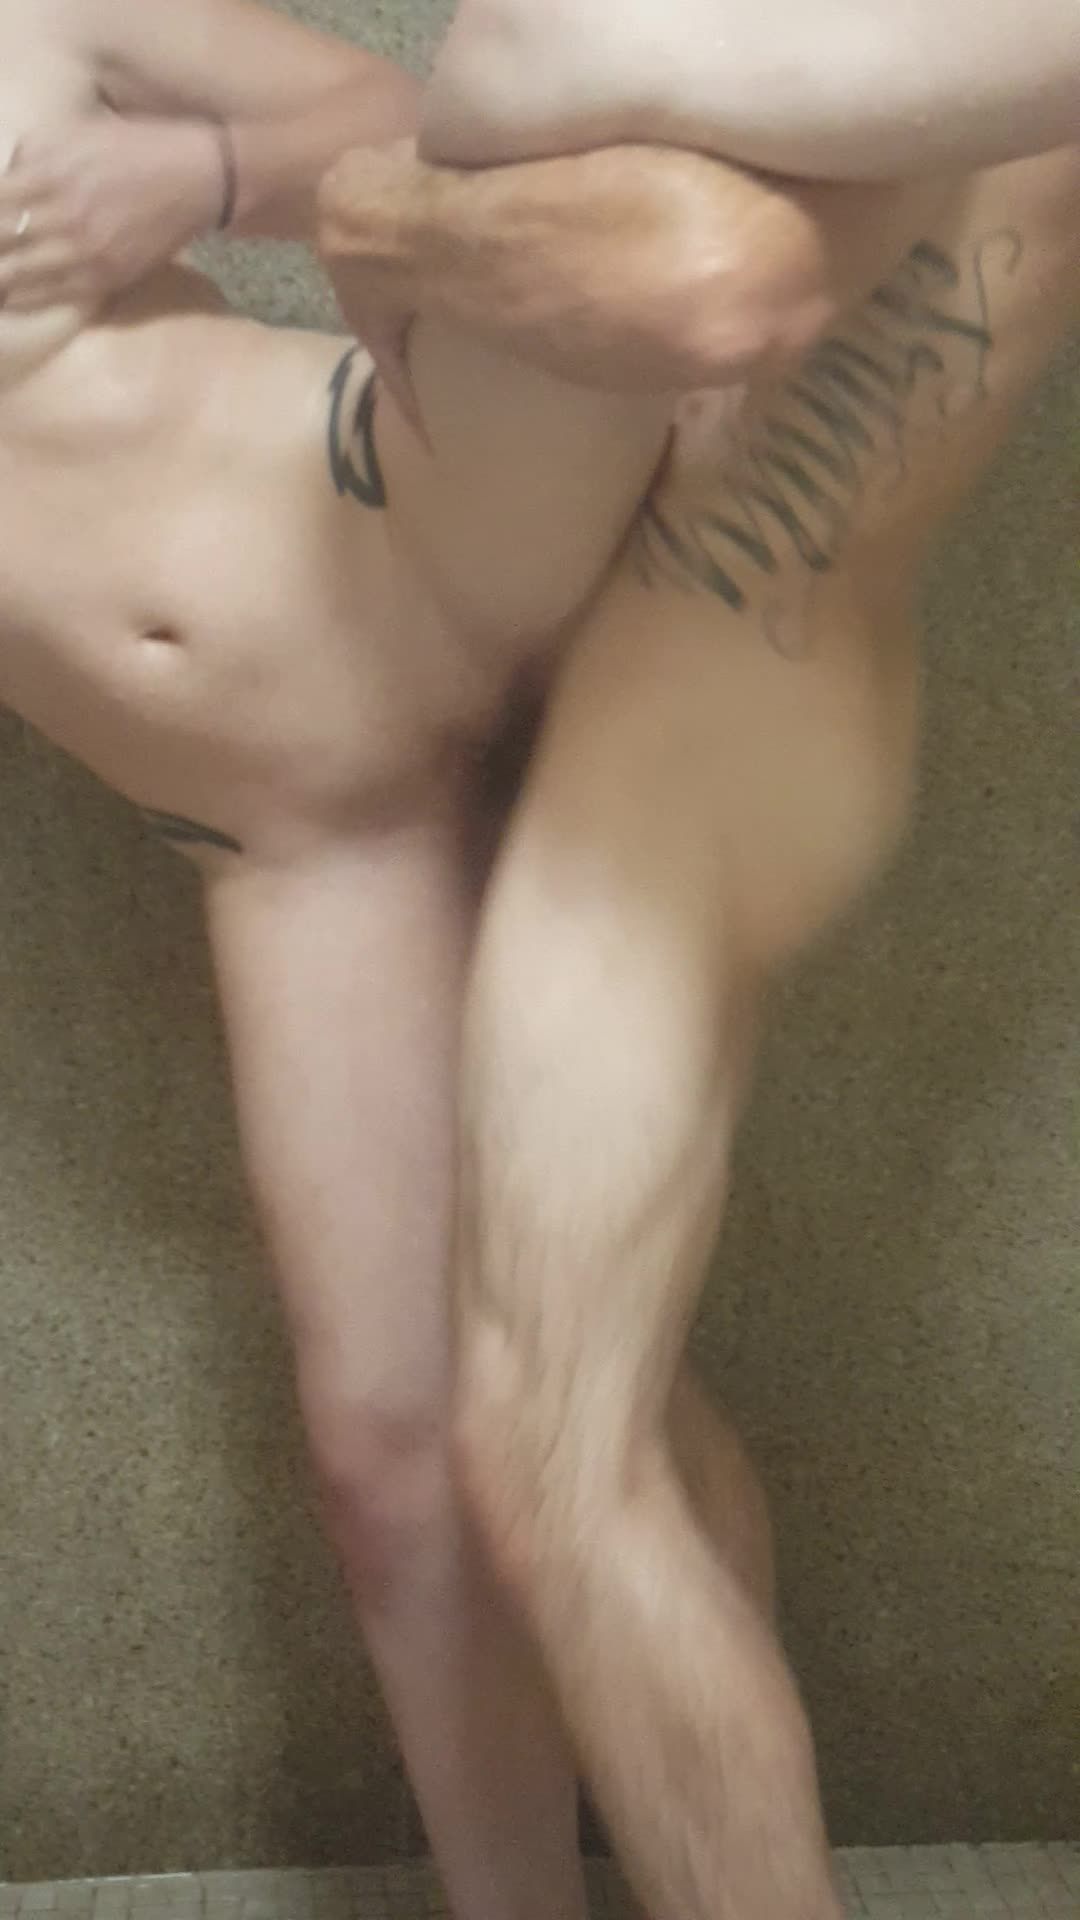 Fucking in the shower